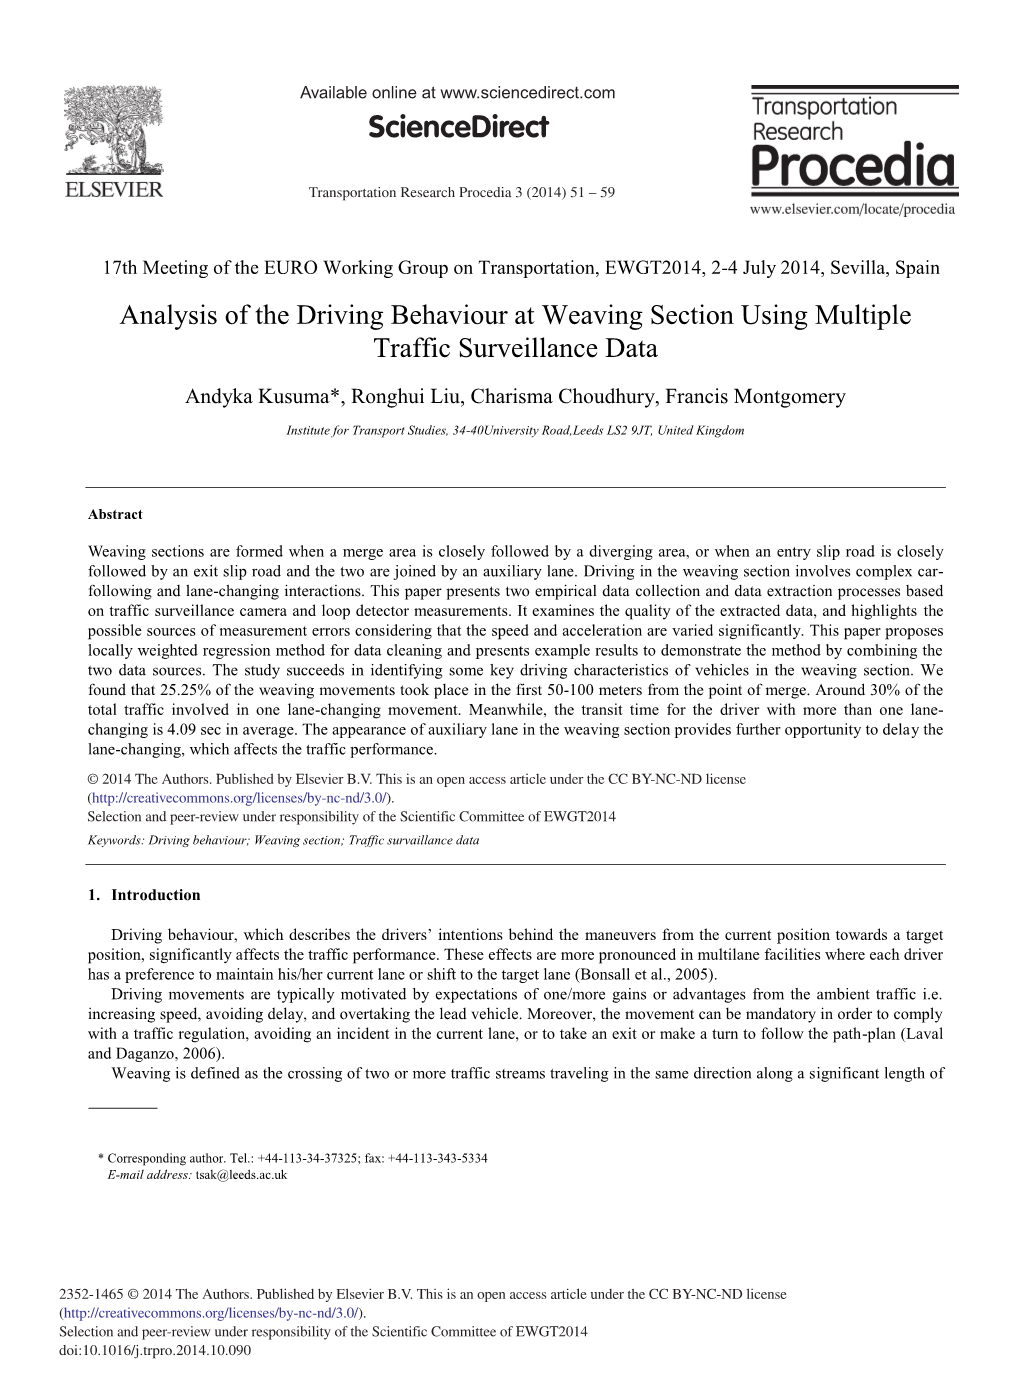 Analysis of the Driving Behaviour at Weaving Section Using Multiple Traffic Surveillance Data